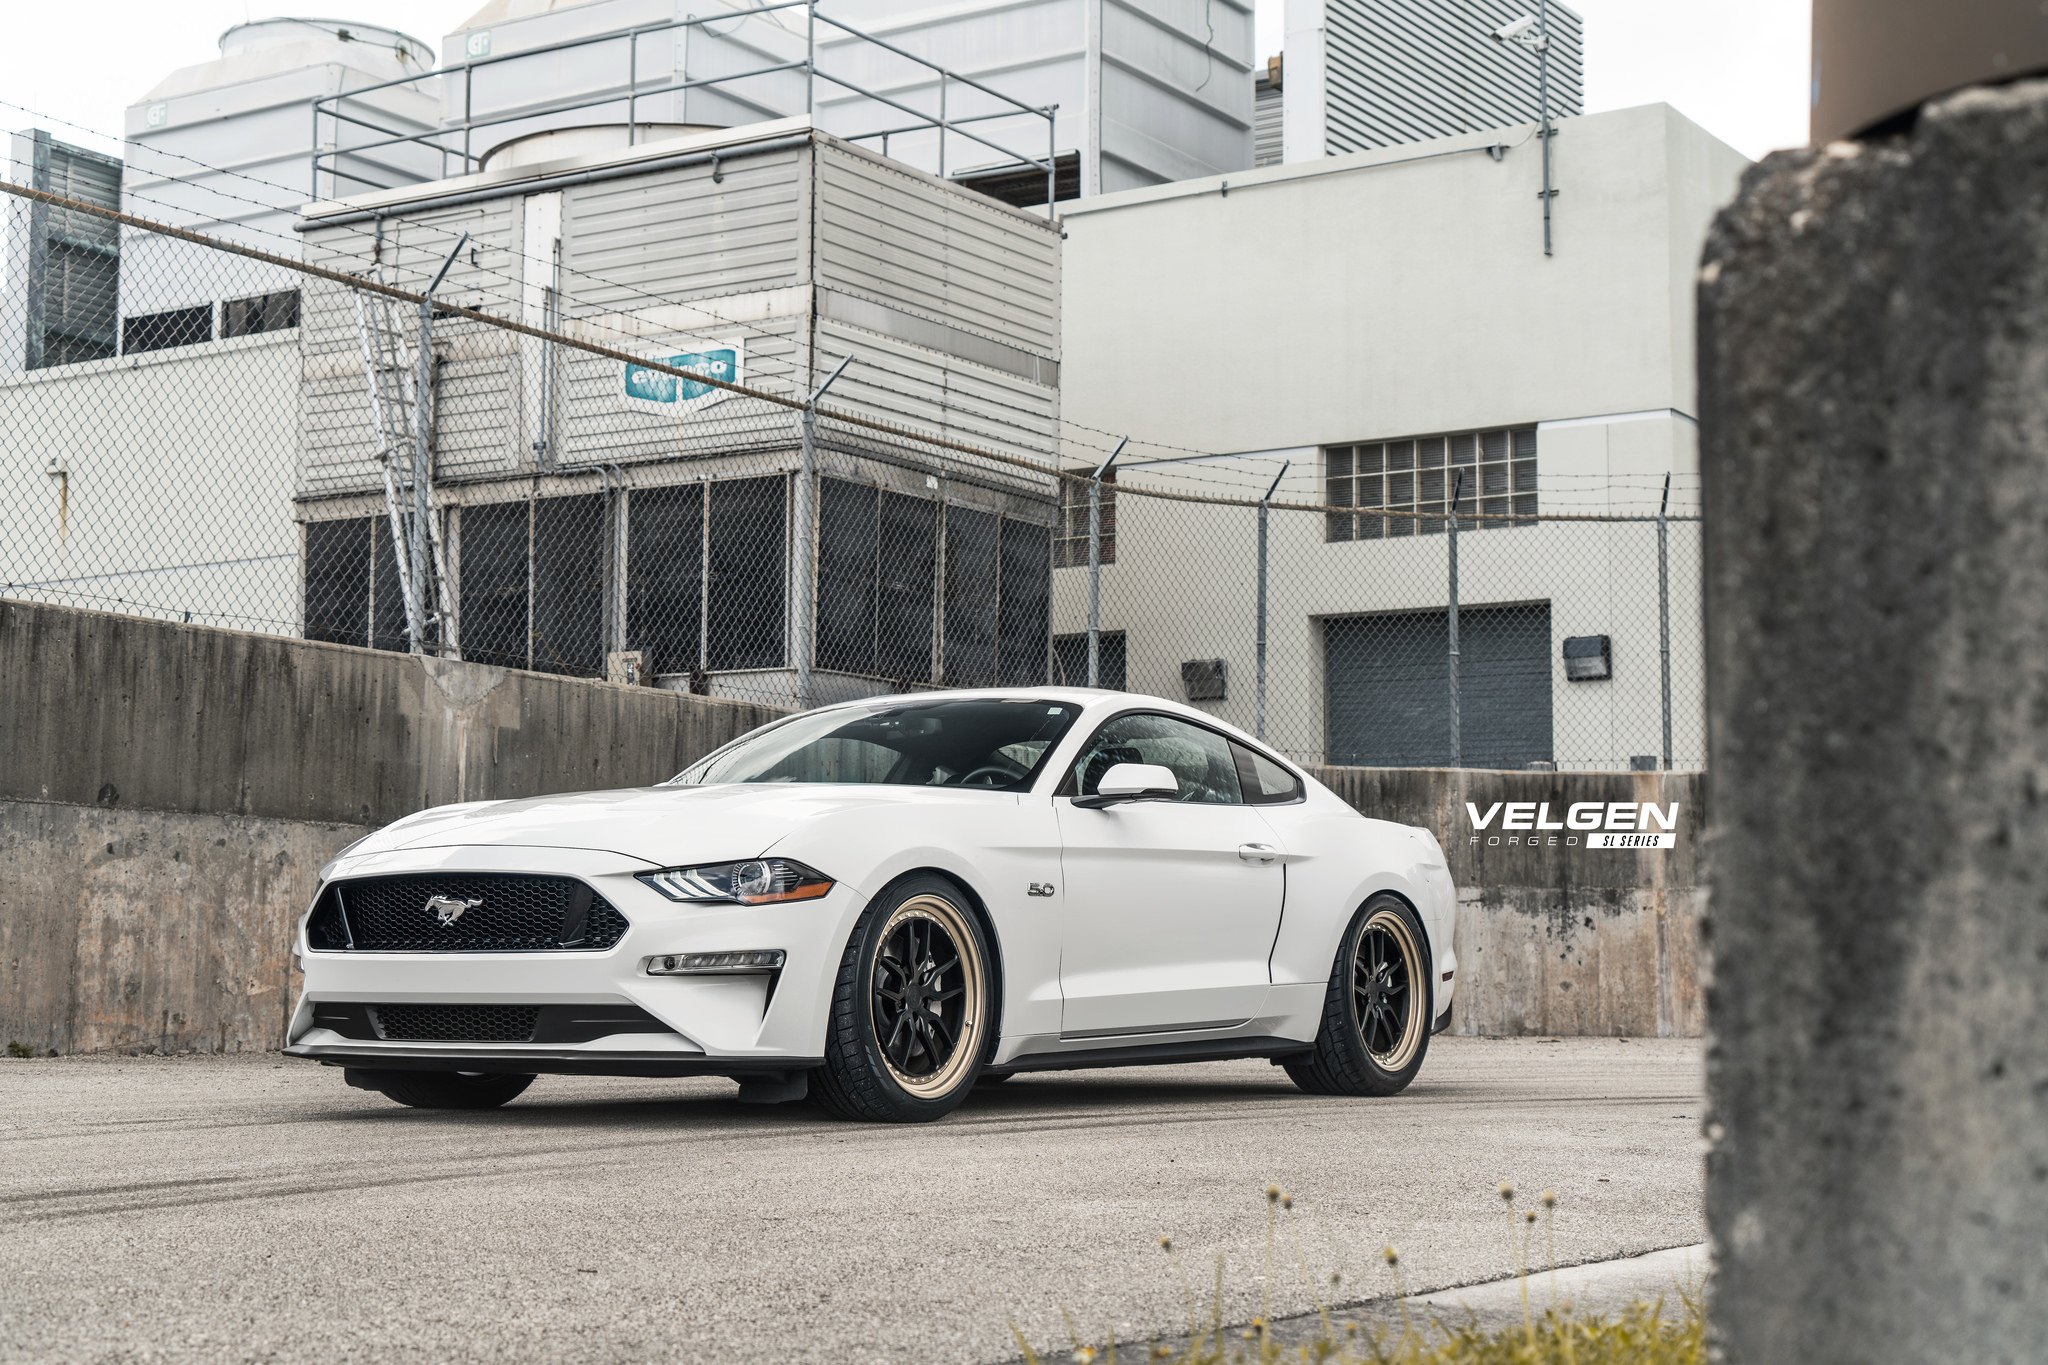 Aftermarket Headlights on White Ford Mustang 5.0 - Photo by Velgen Wheels